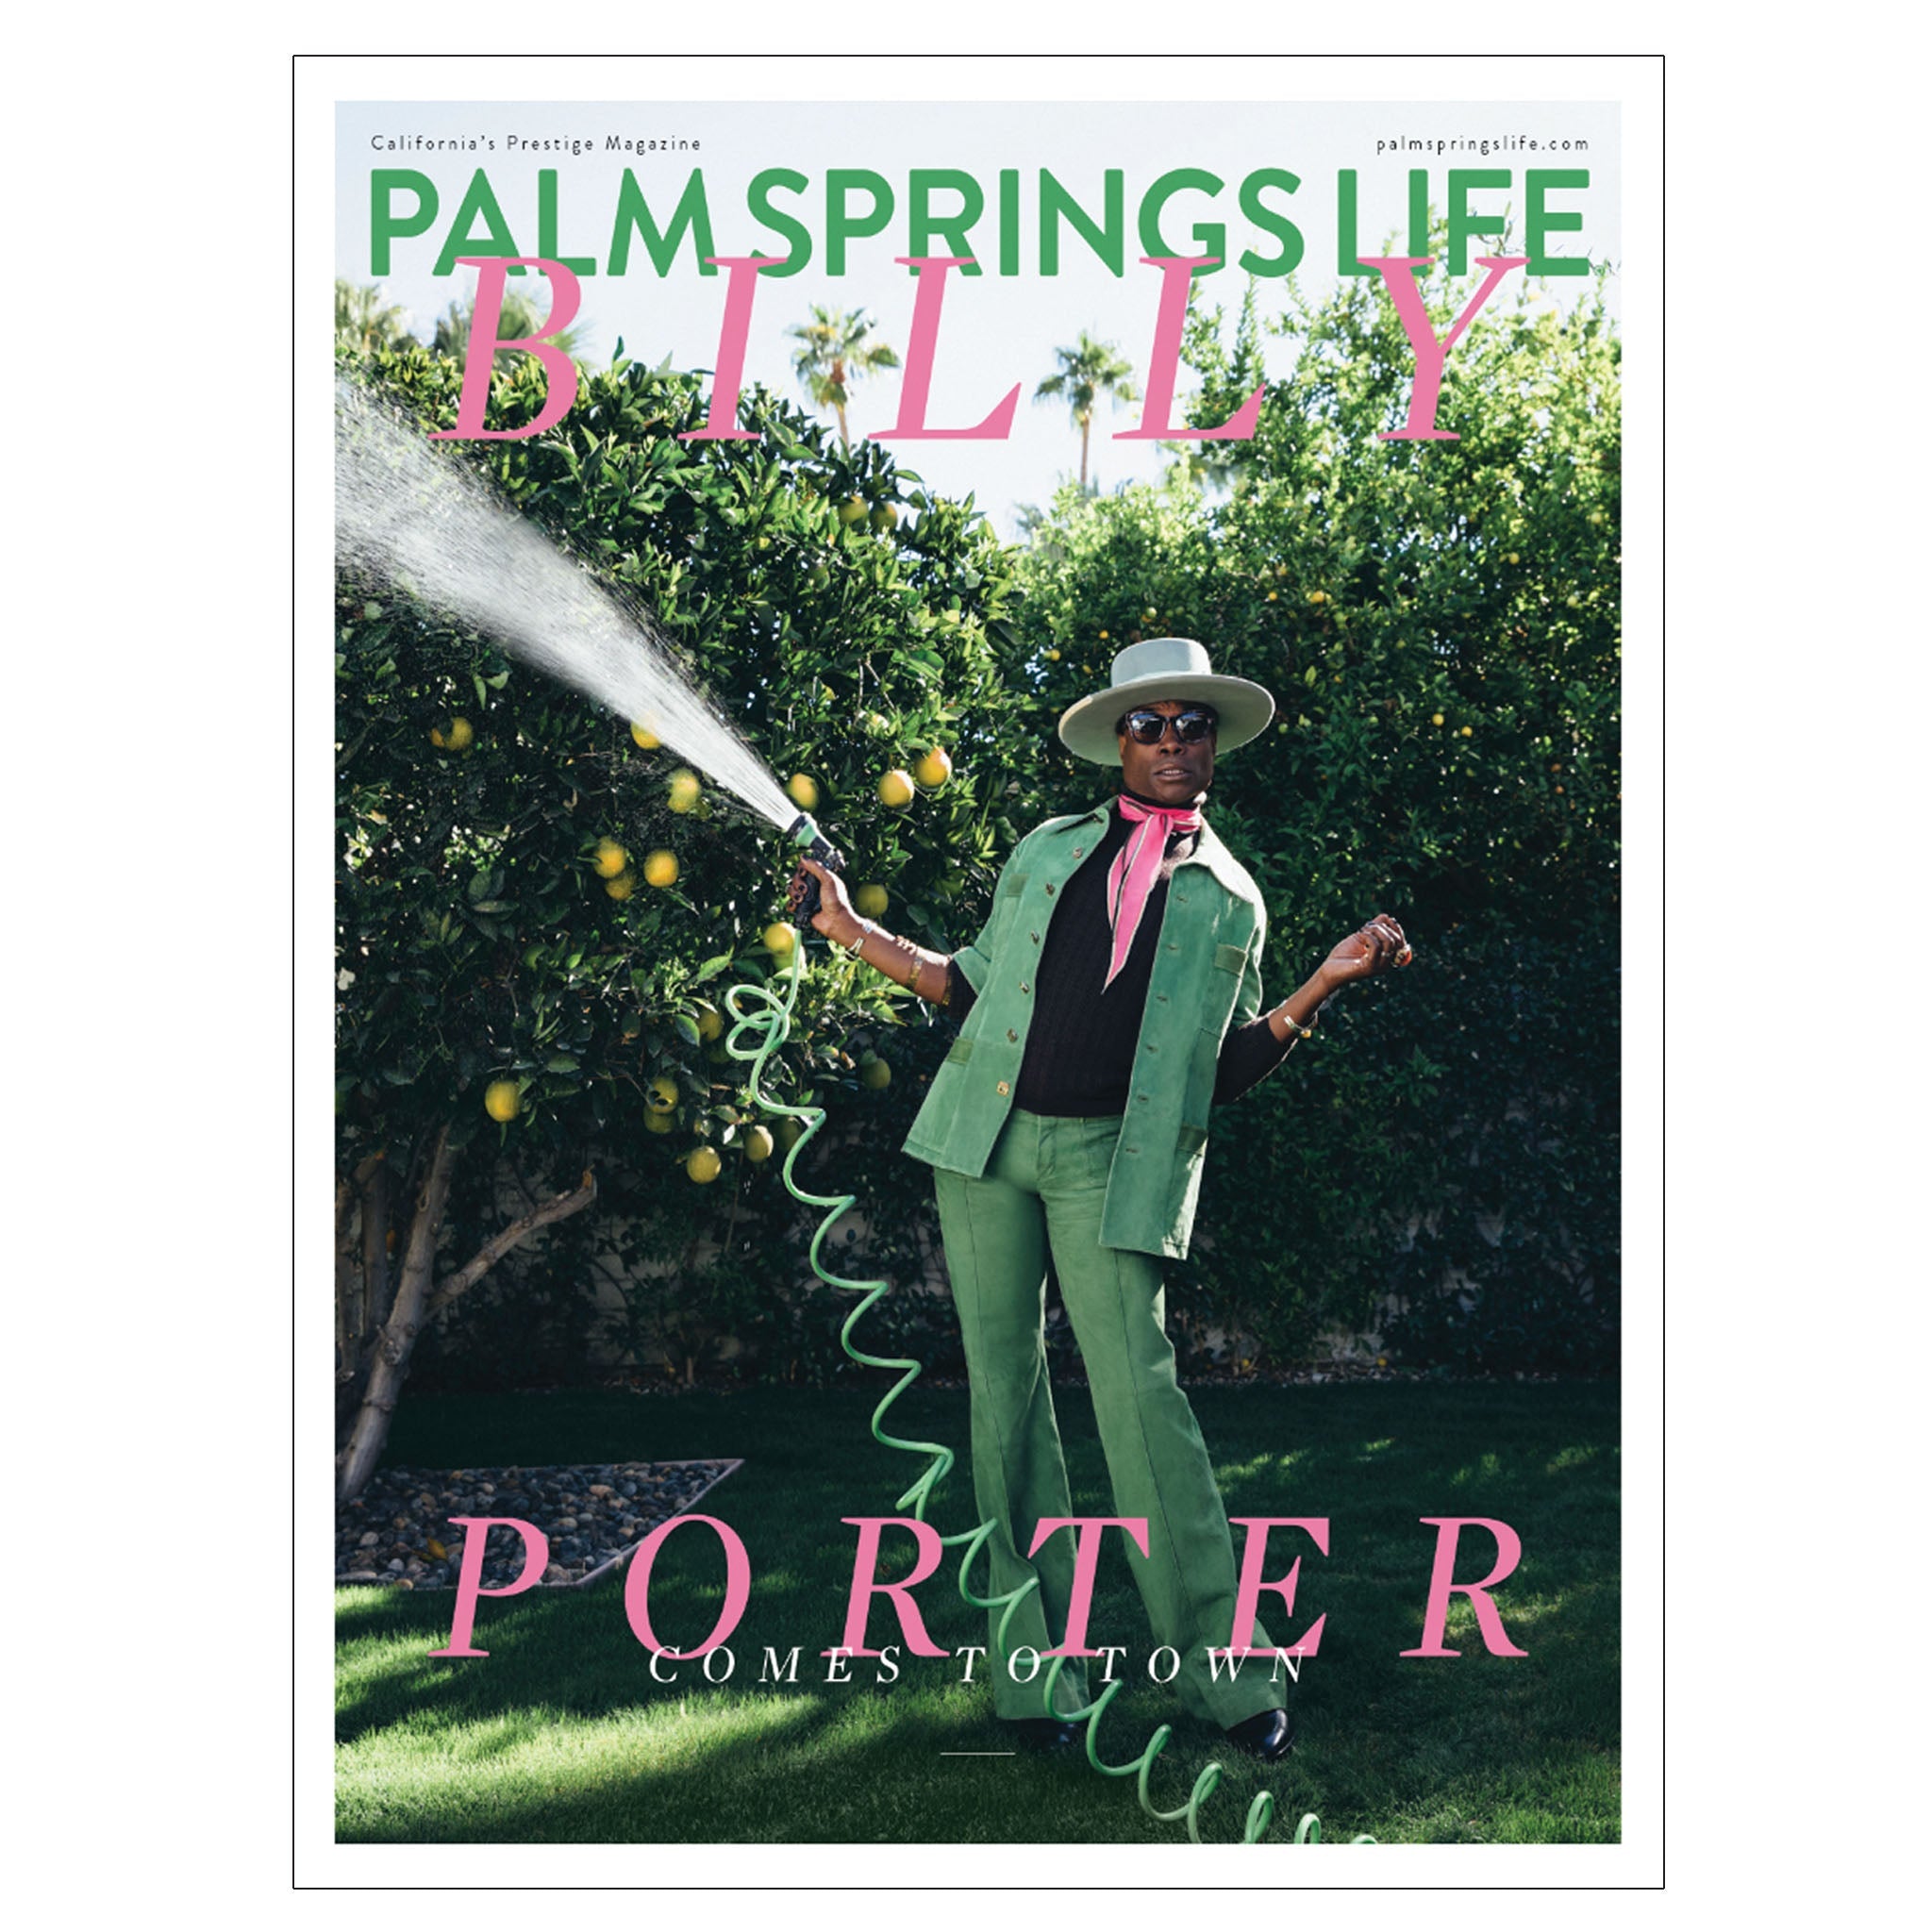 Palm Springs Life - December 2019 - Cover Poster